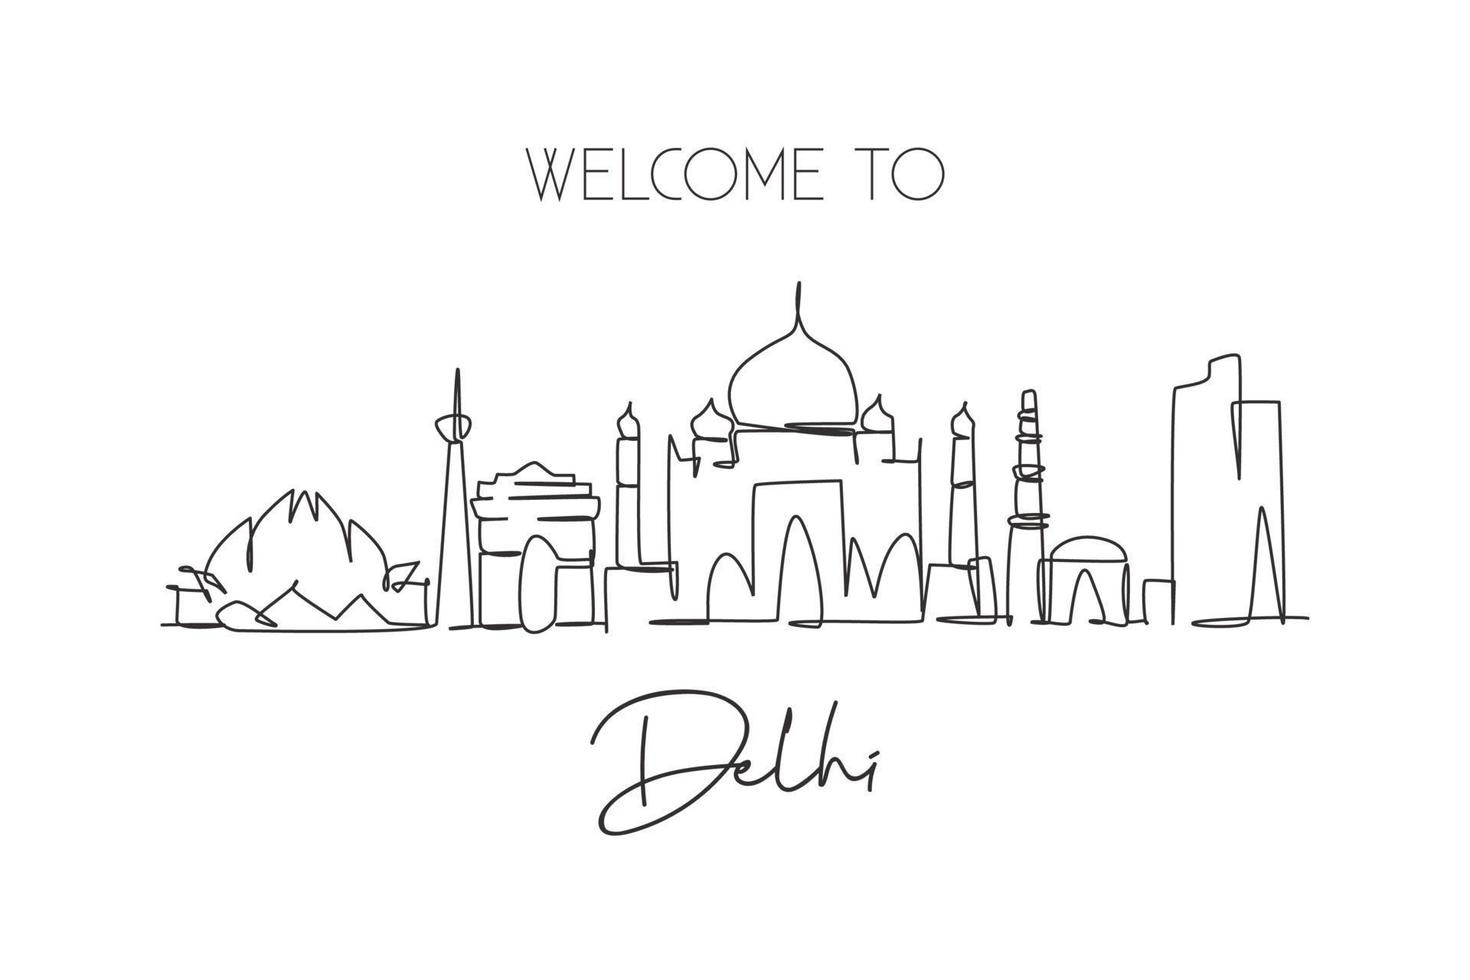 Outline delhi india city skyline with historic buildings isolated on white.  vector illustration. delhi cityscape with | CanStock